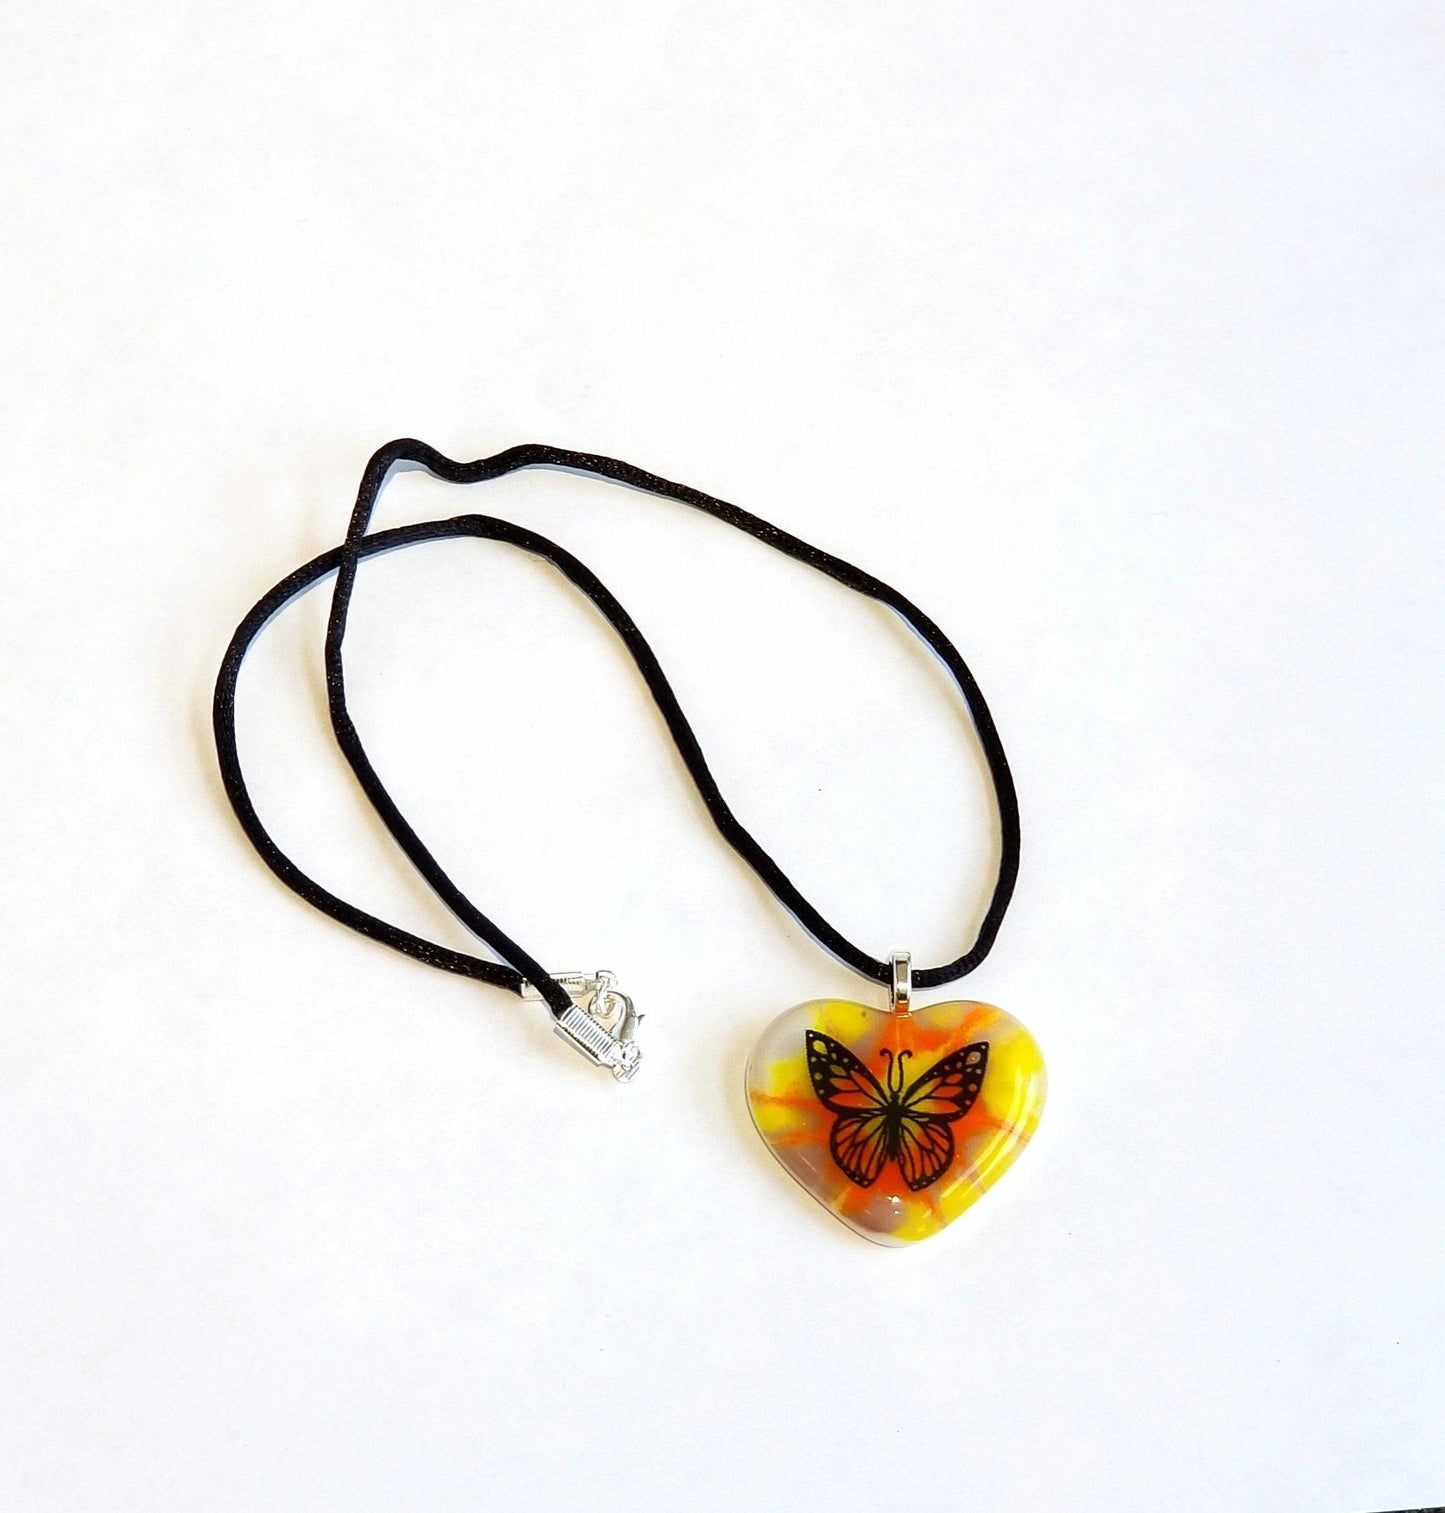 Tie Dye look and Butterfly fused glass Heart necklace, rainbow color from seeds glassworks